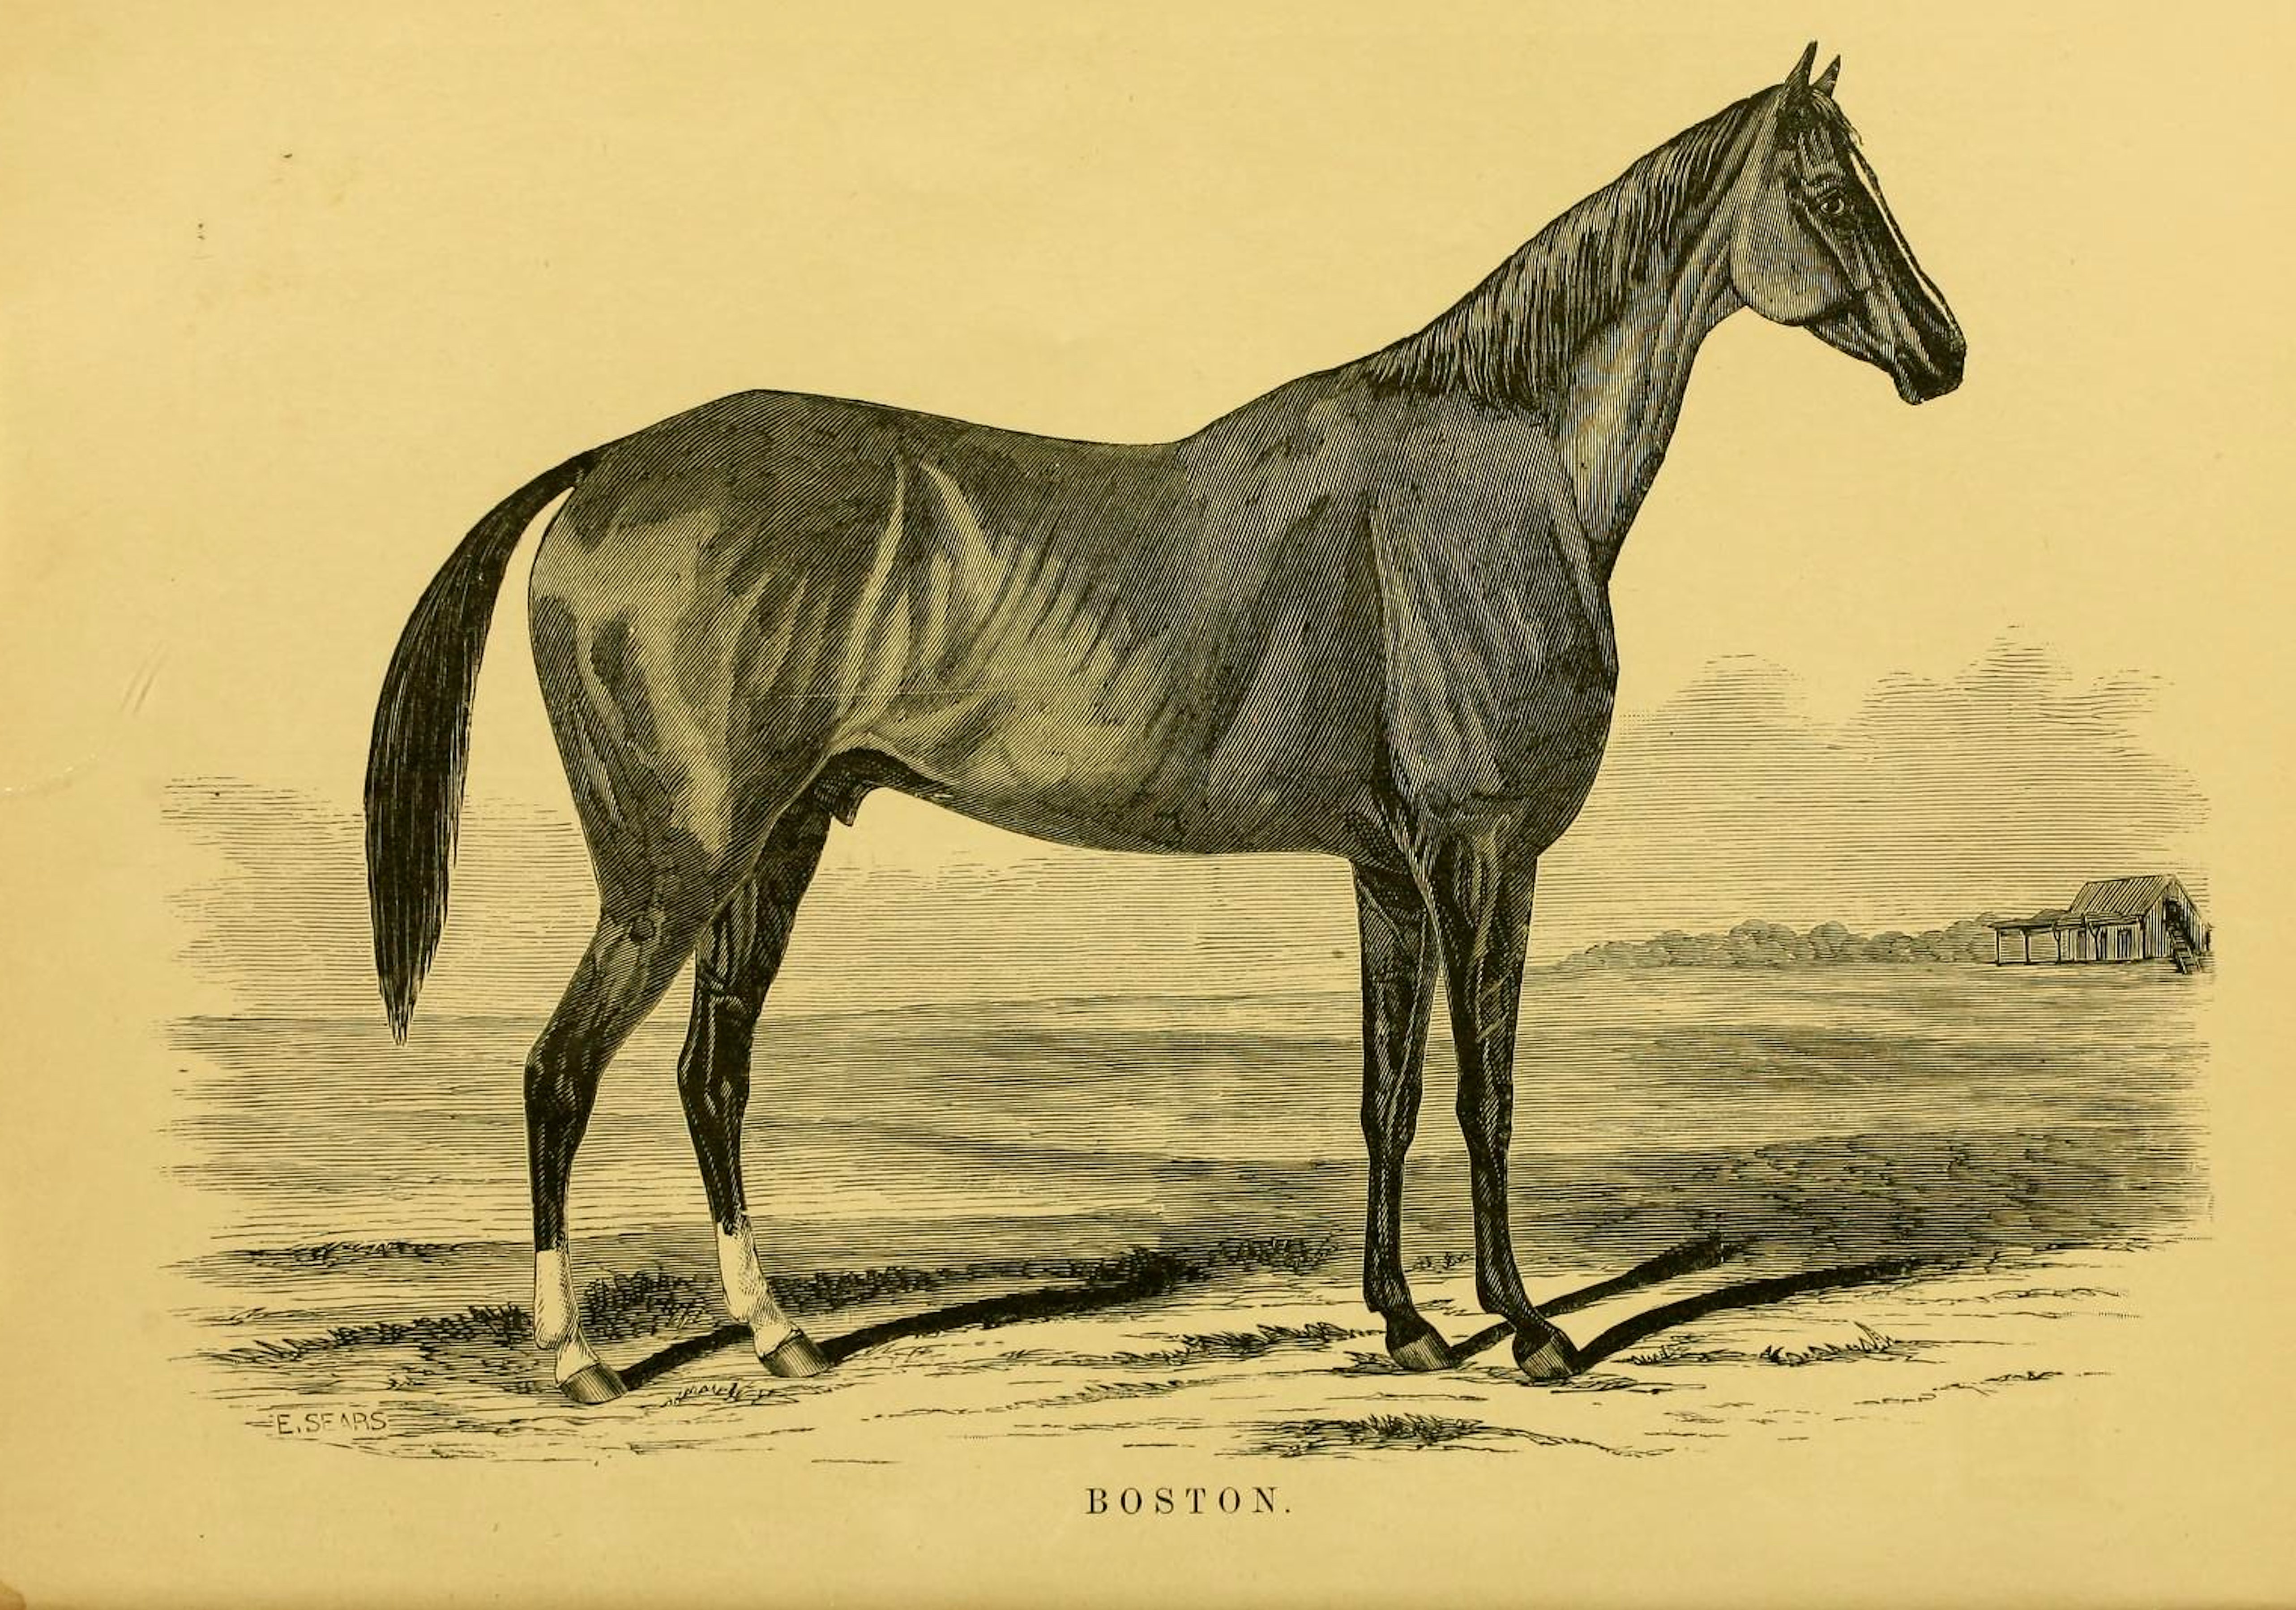 Illustration of Boston from "Famous American Racehorses," 1877 (Museum Collection)